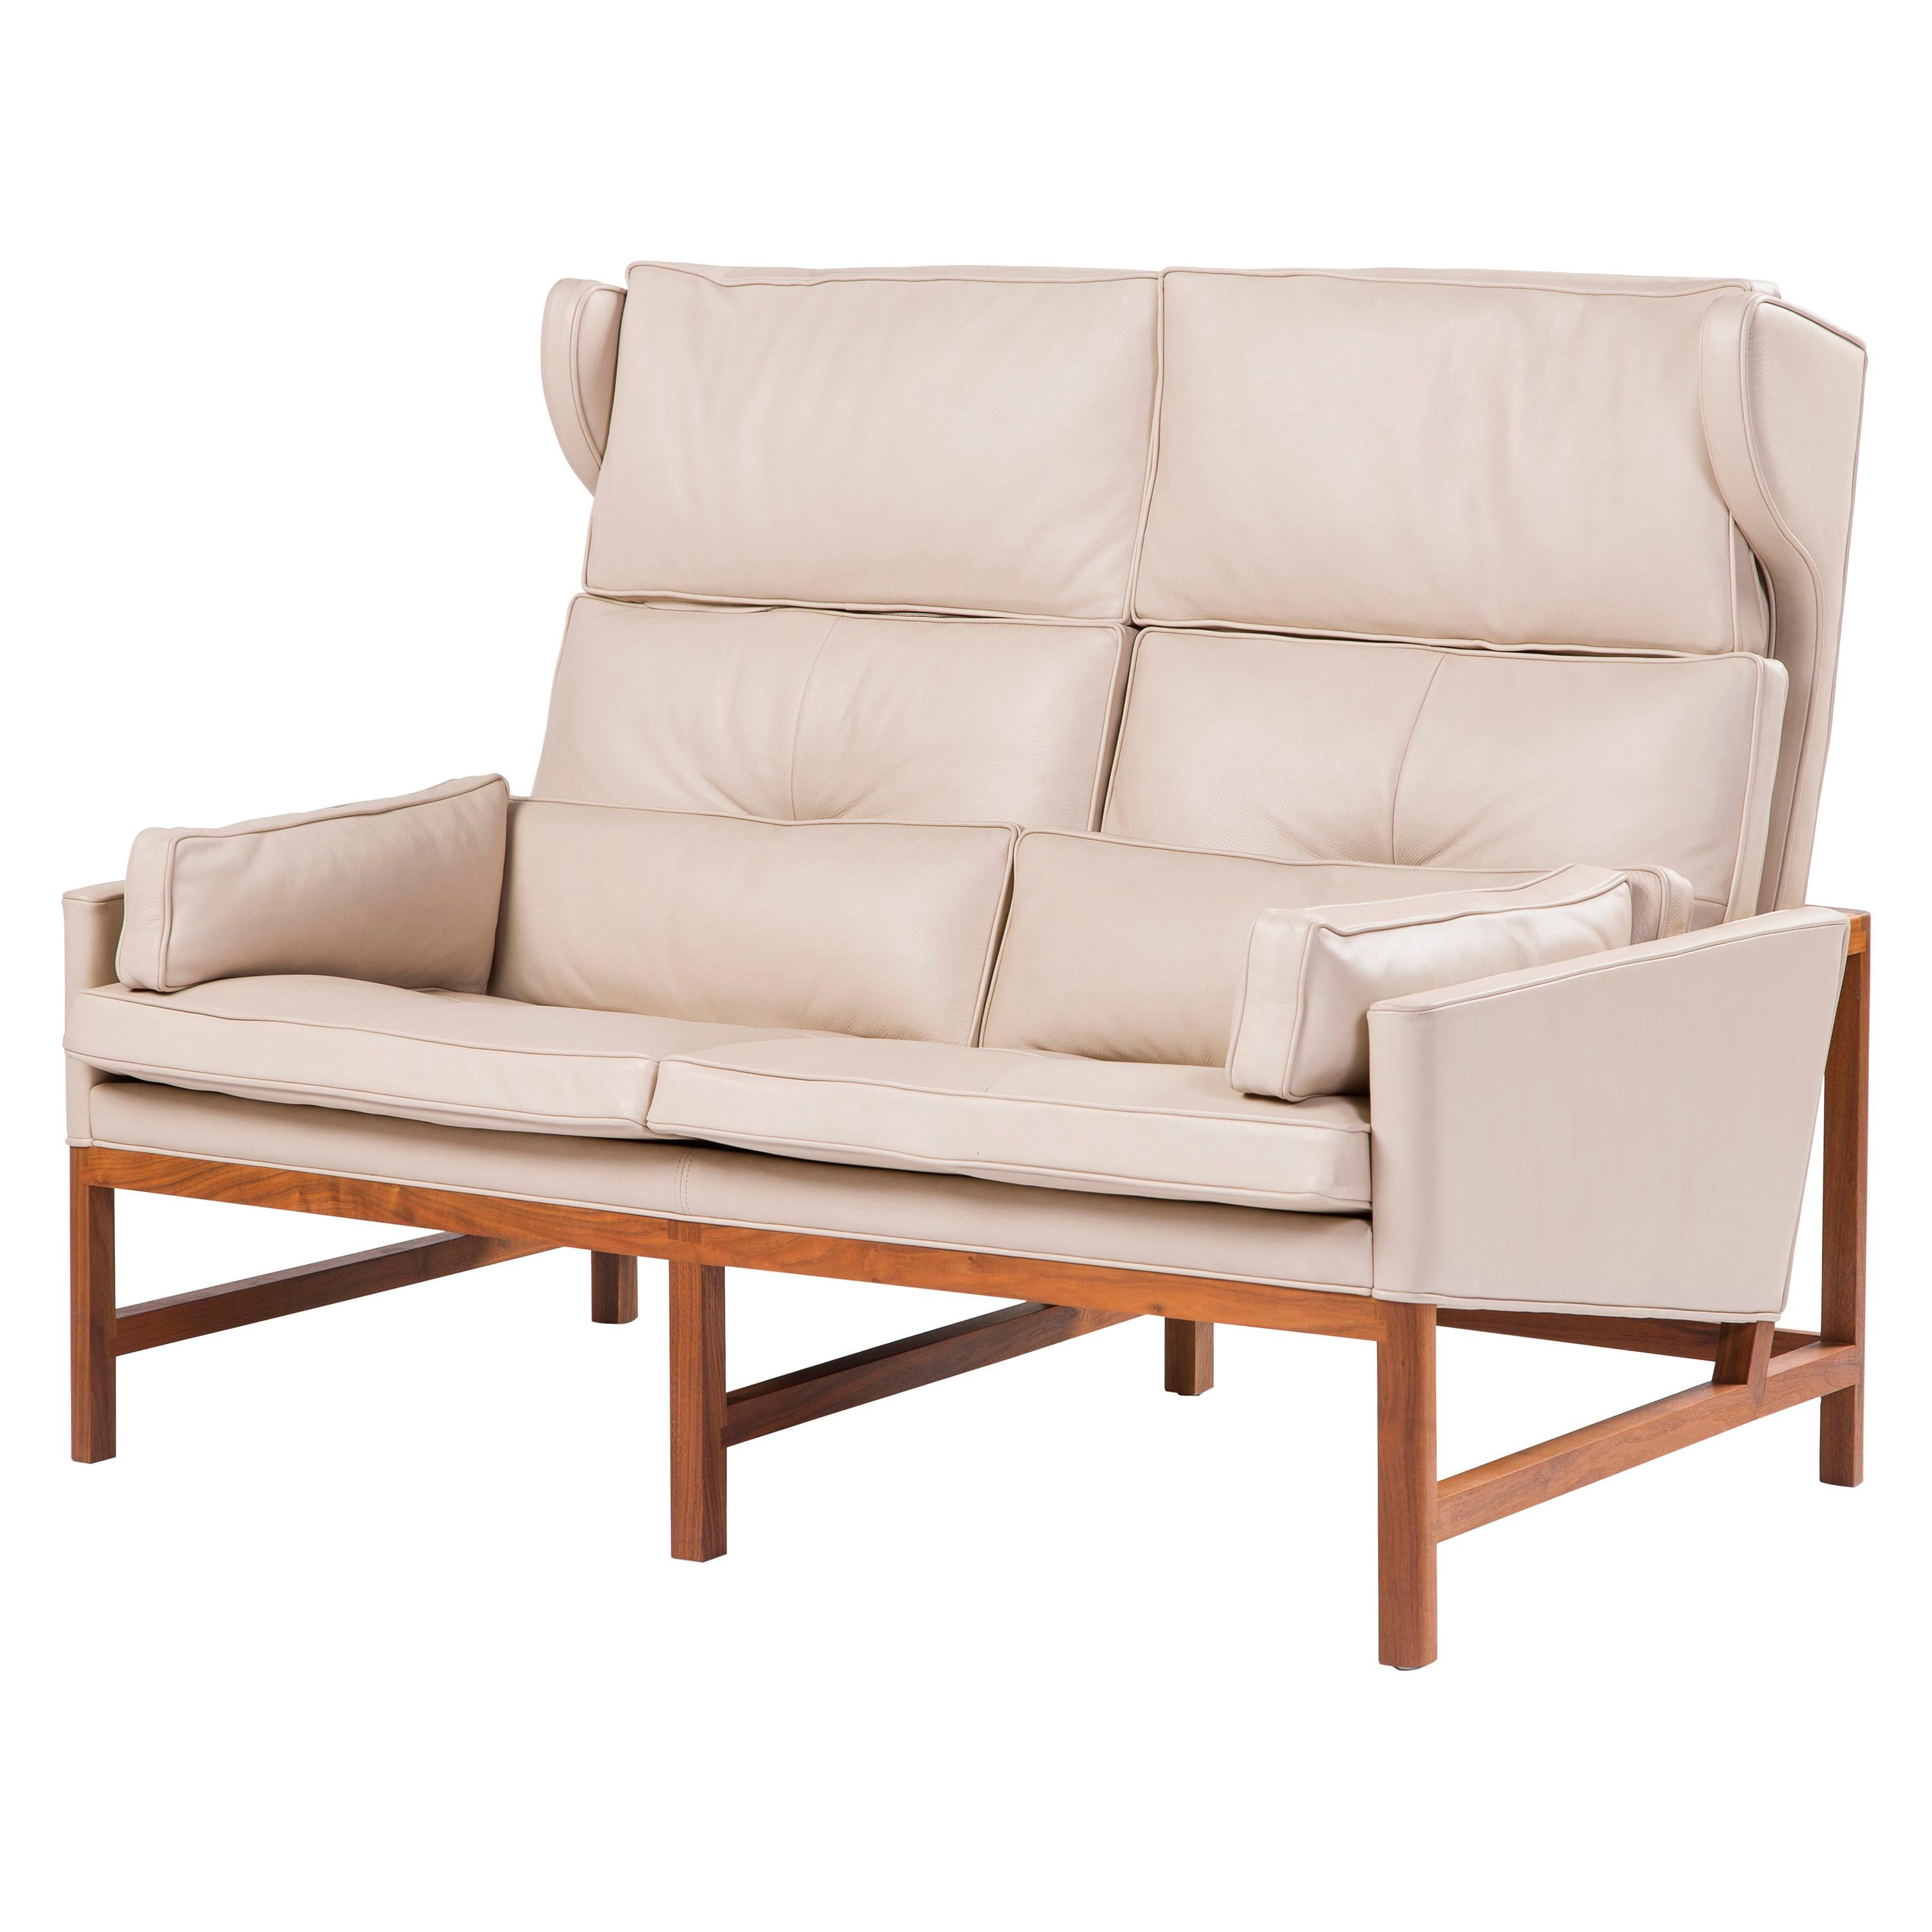 For Sale: Beige (Comfort 02067 Beige) Wood Frame Wing Back Settee in Walnut and Leather Designed by Craig Bassam